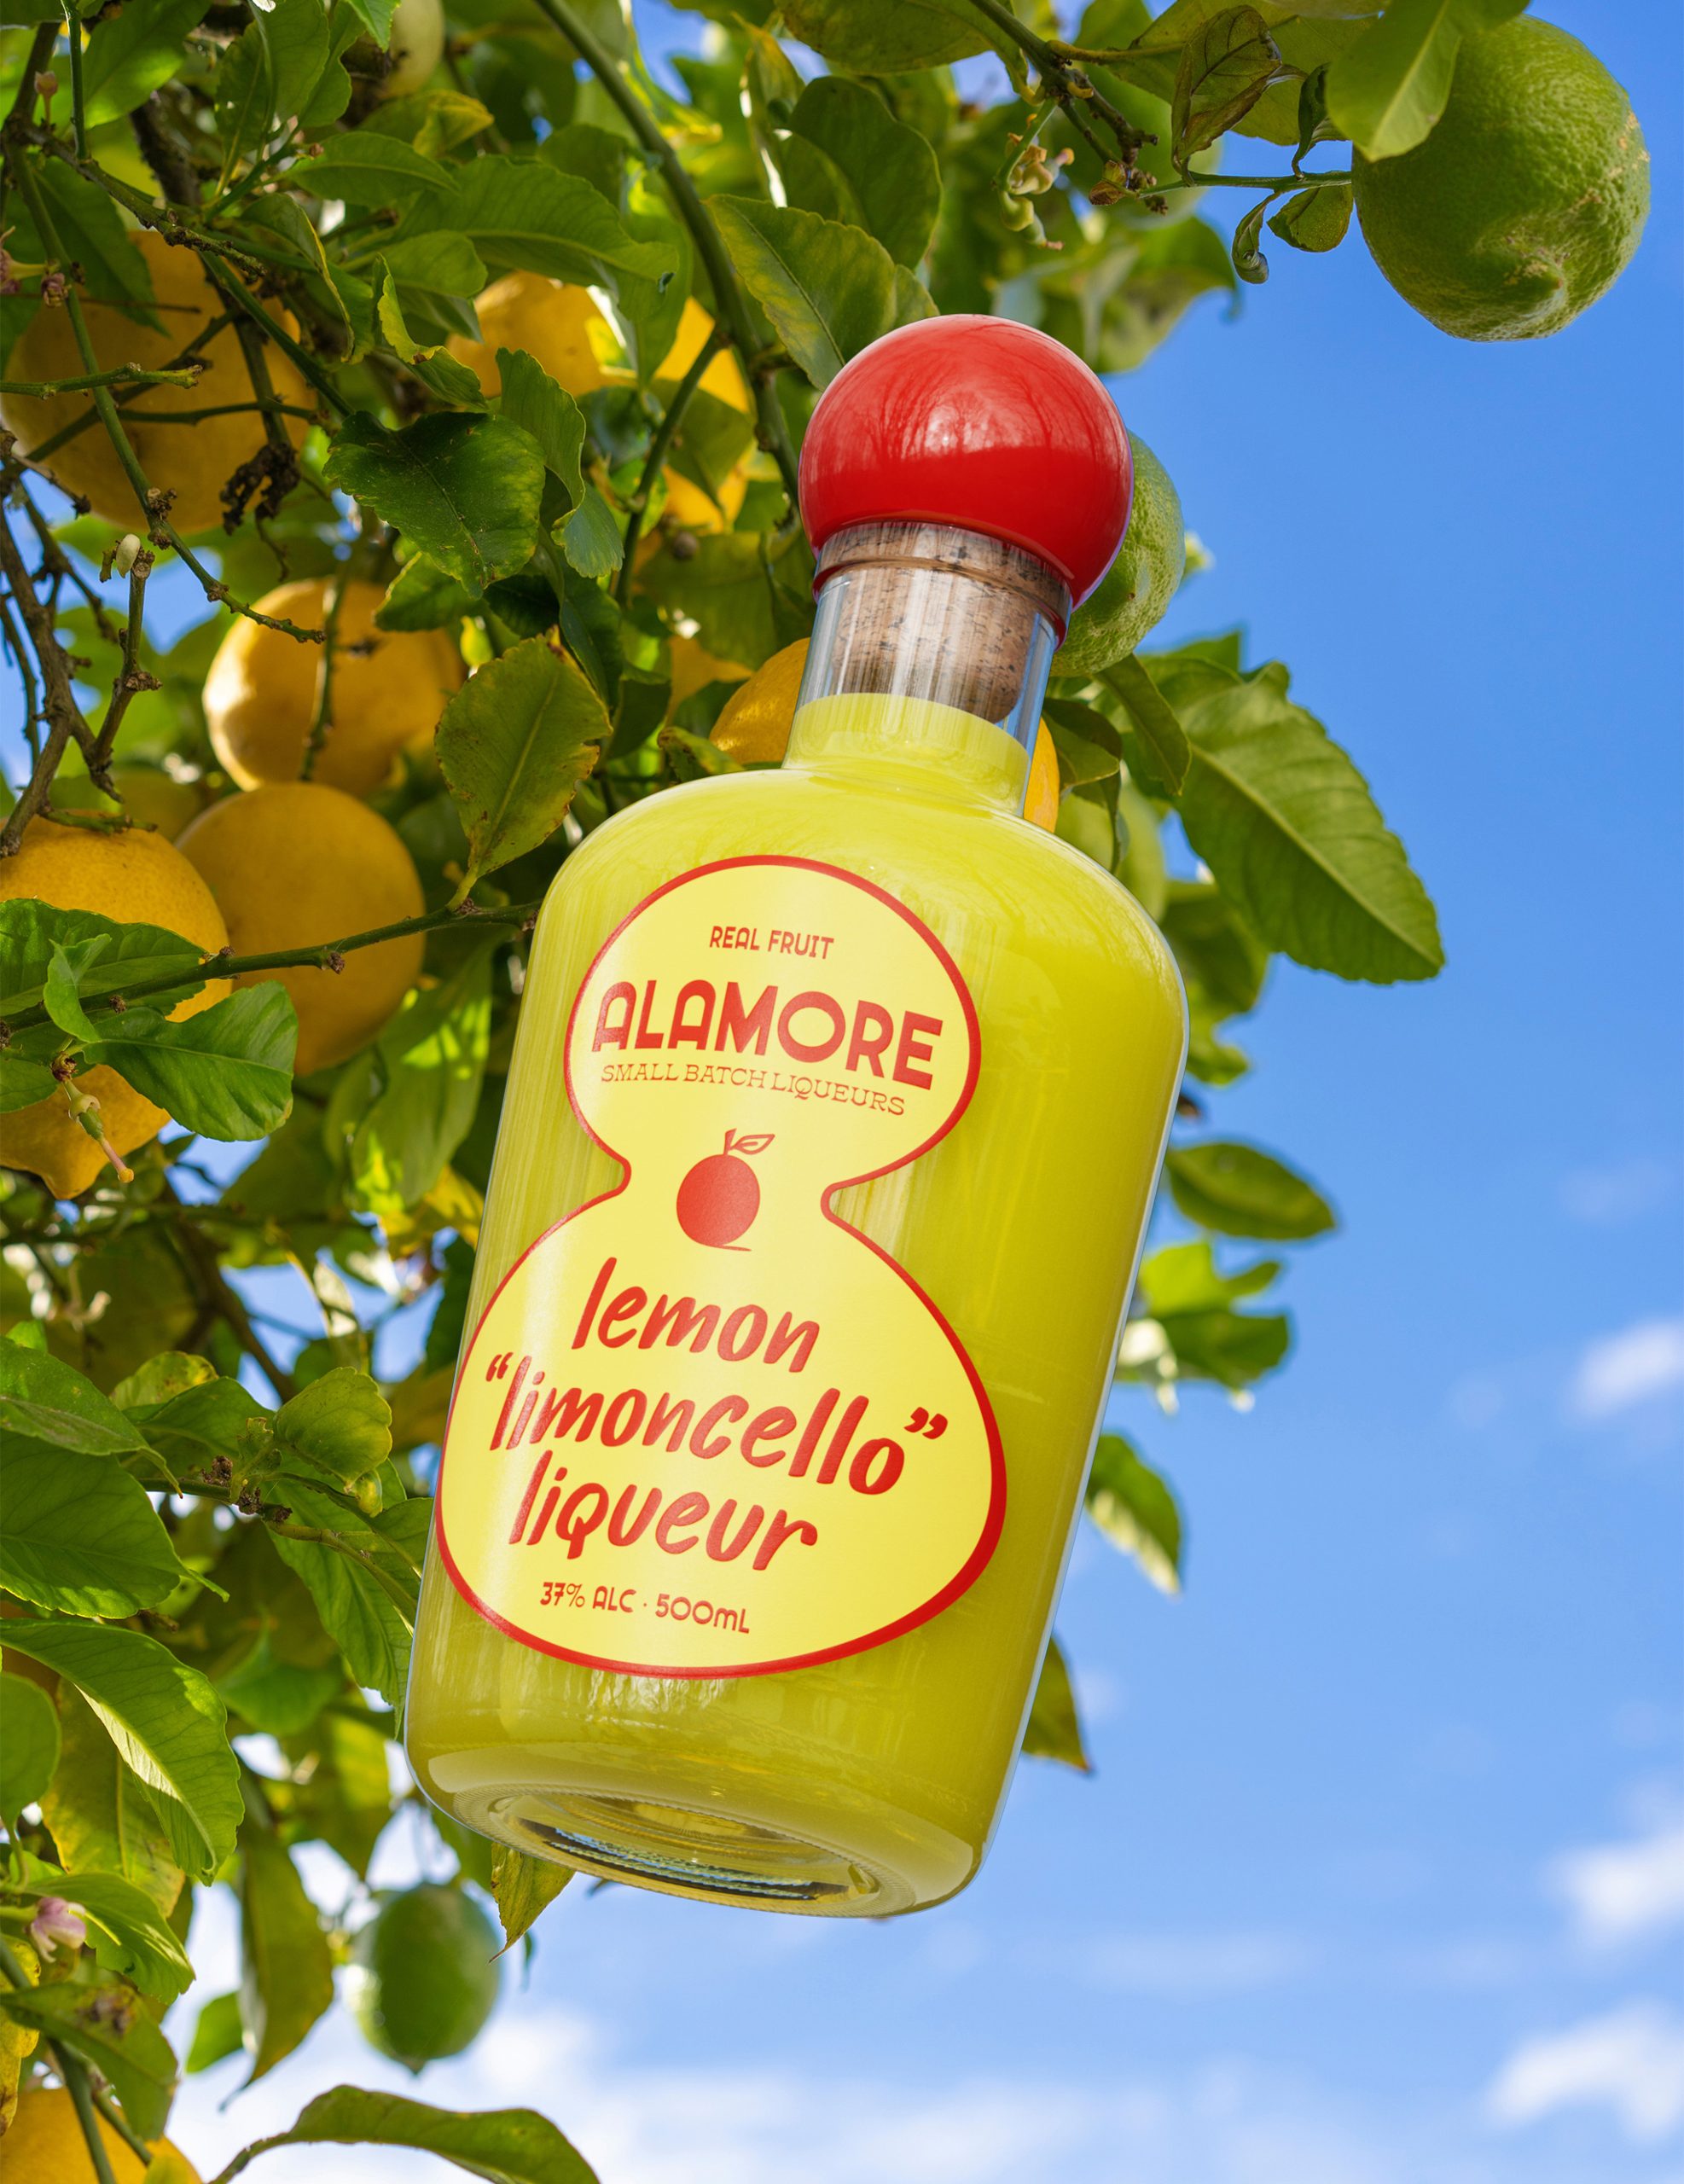 Alamore’s Small-Batch Liqueurs Make “Eye Candy” Literal with an Eclectic, Fruit-Inspired Bottle